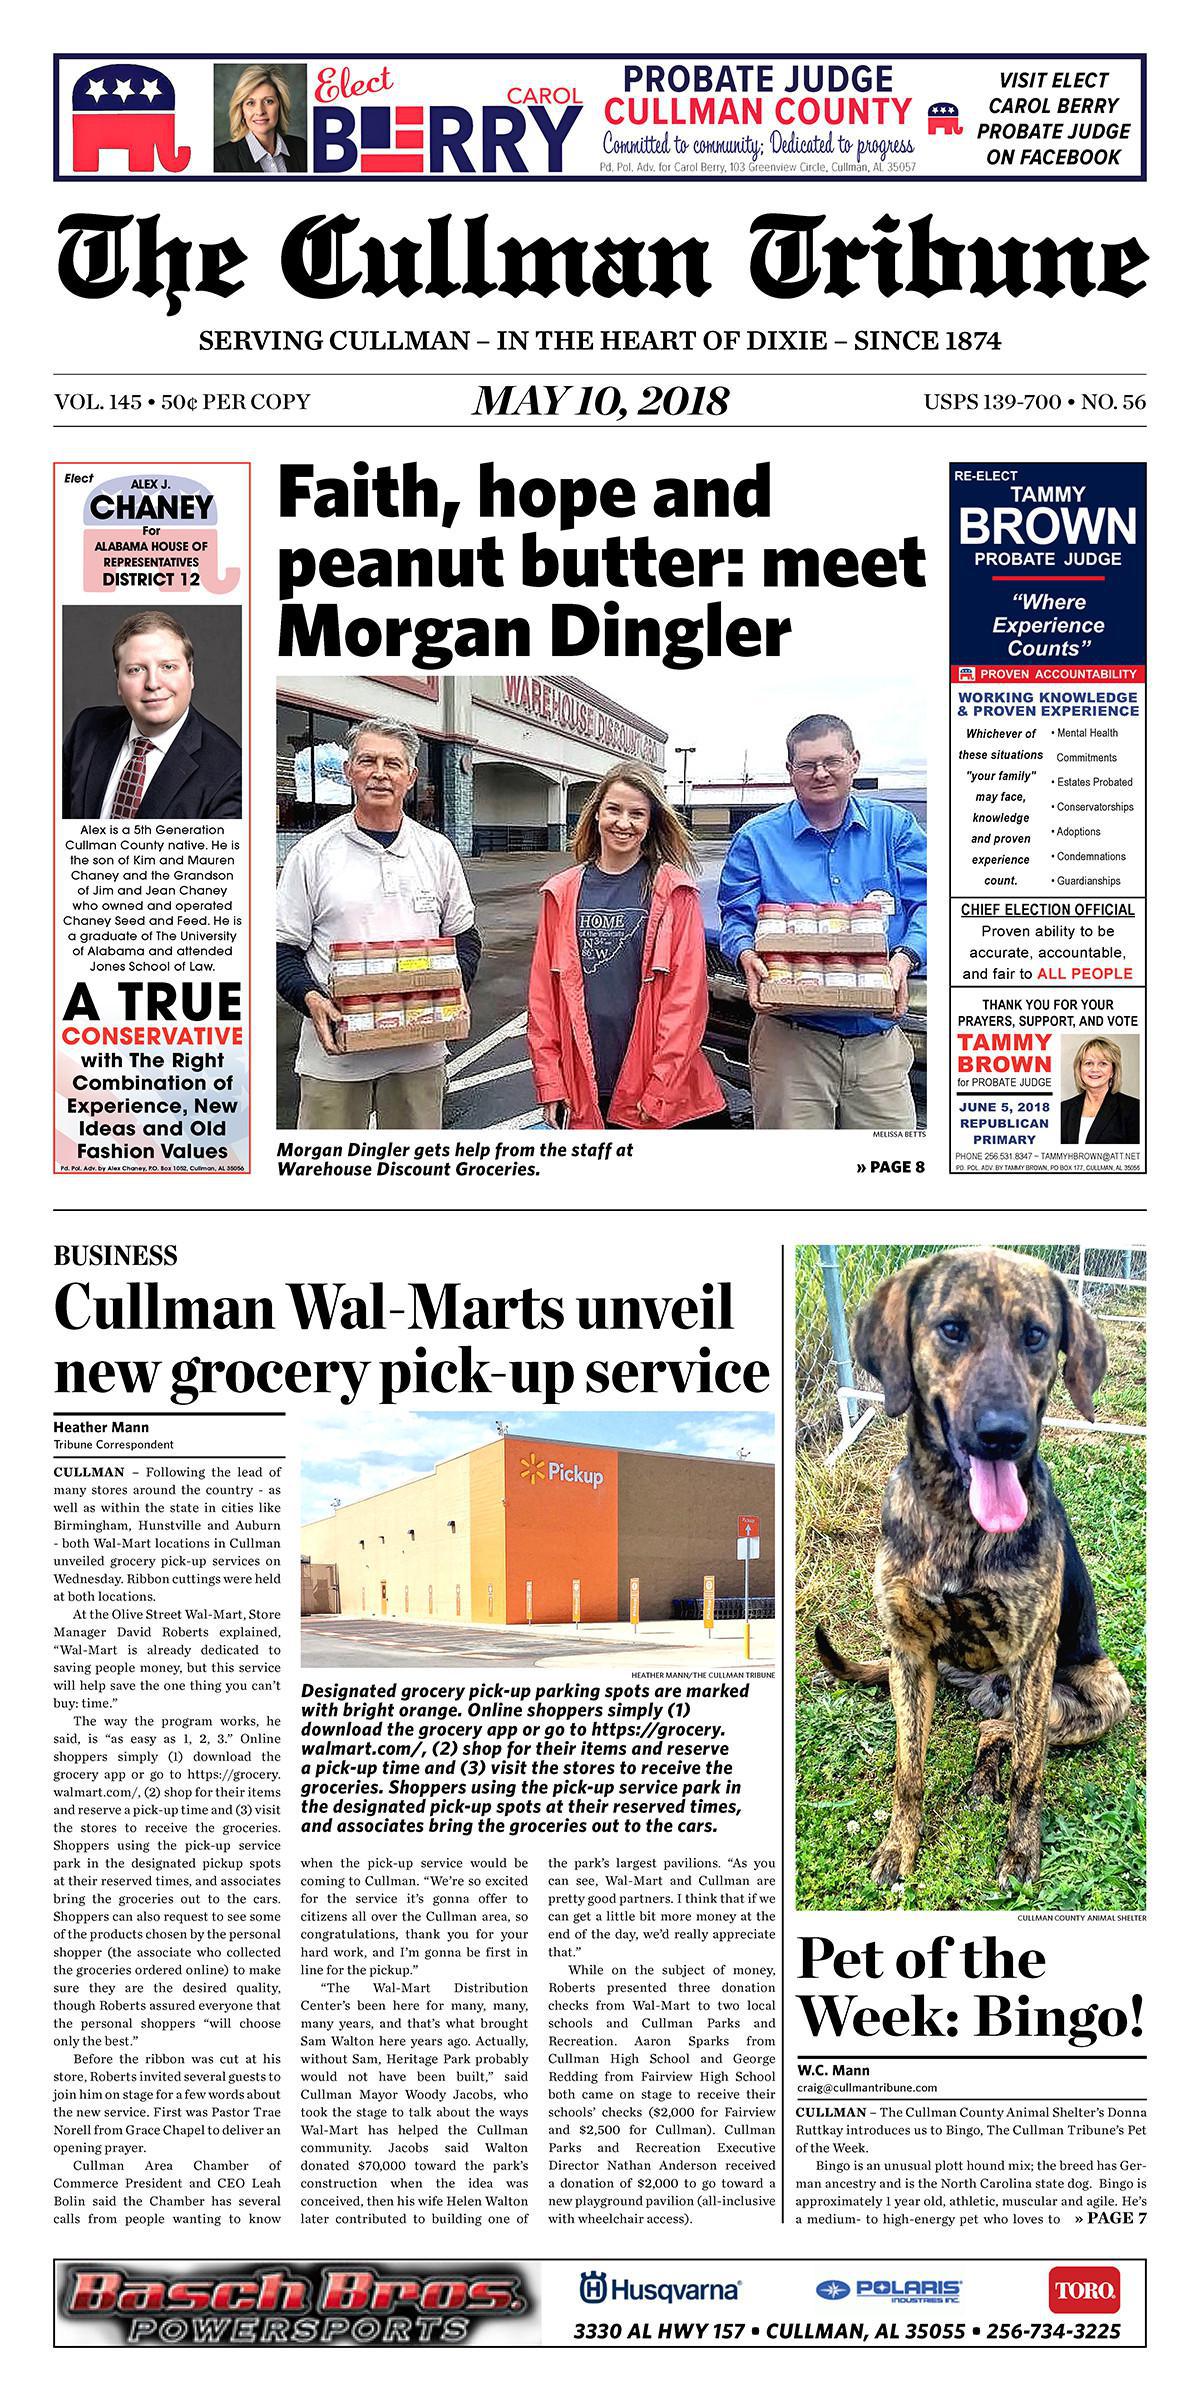 Good Morning Cullman! The 05-10-2018 edition of the Cullman Tribune is now ready to view